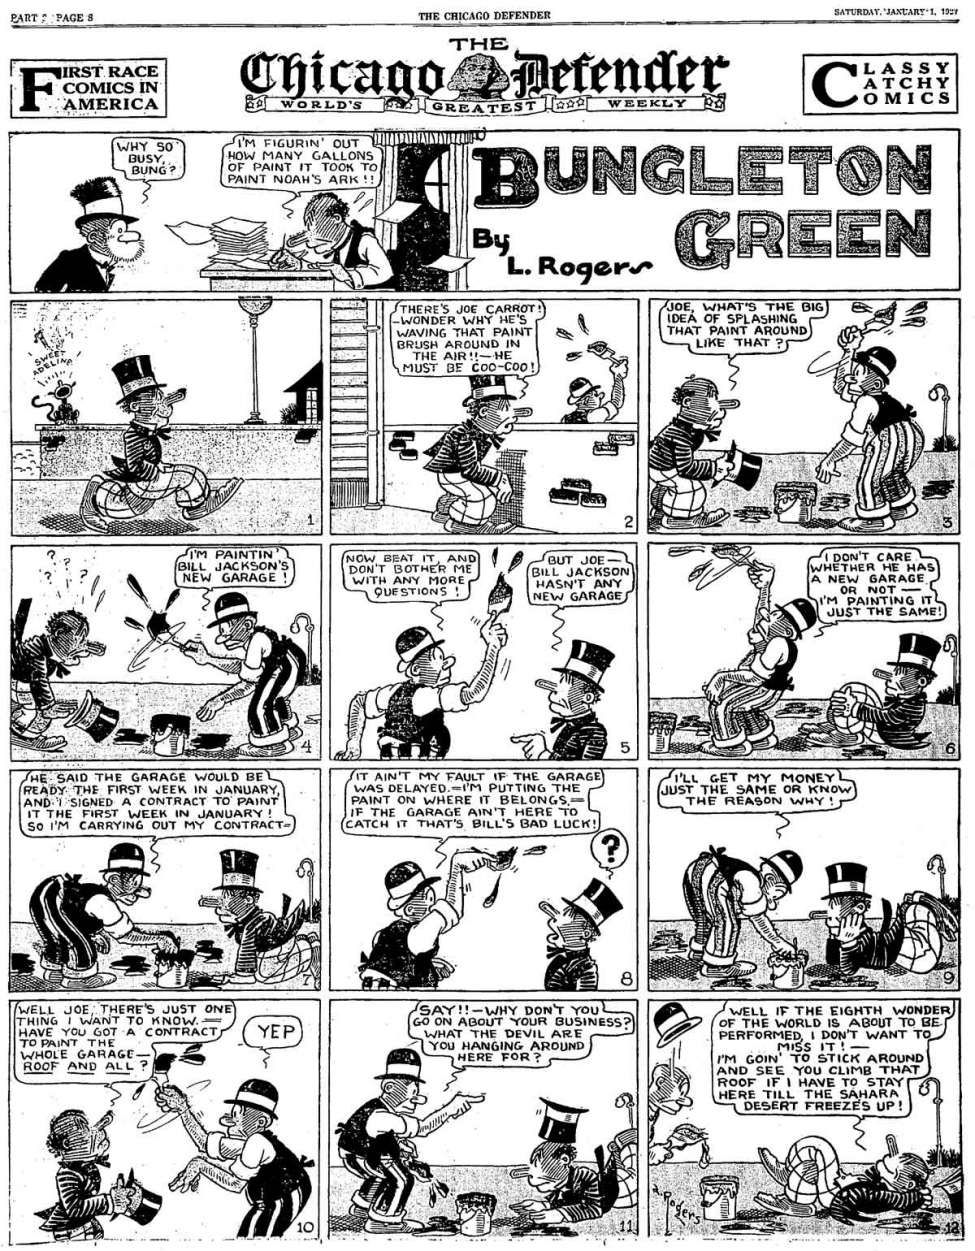 Ladybug reccomend Comic strip appeared in us newspapers between 1913 and 1944